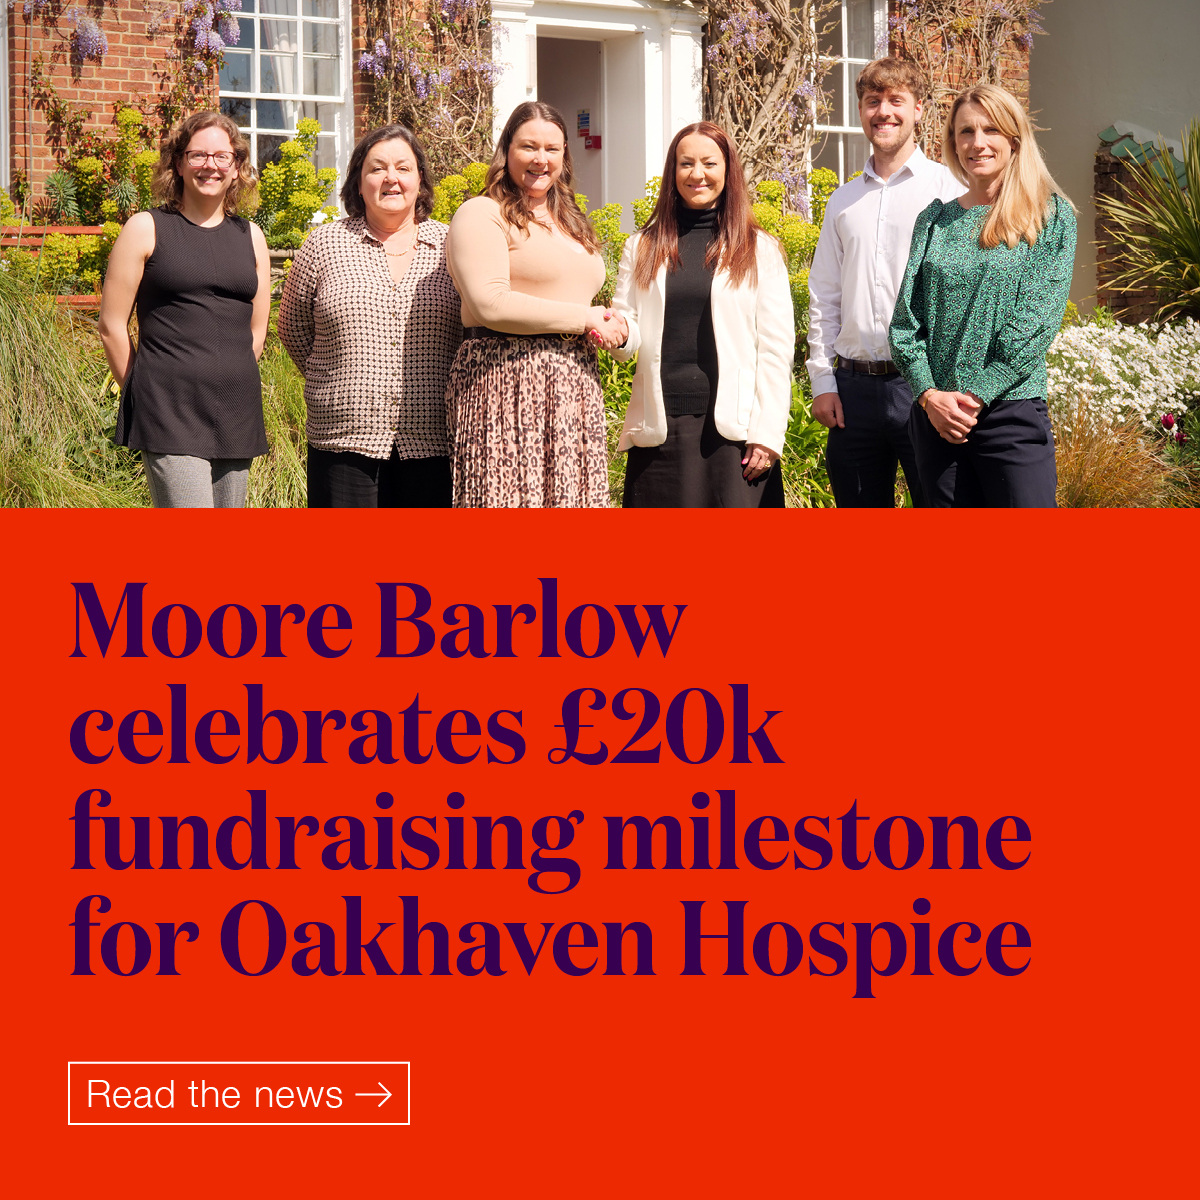 Our Lymington office has been a long term supporter of the Oakhaven Hospice and we are very proud to have raised over £20,000 for the hospice’s work in the local community. hubs.ly/Q02v1N6S0 #OakhavenHospice #GivingBack #CommunitySupport